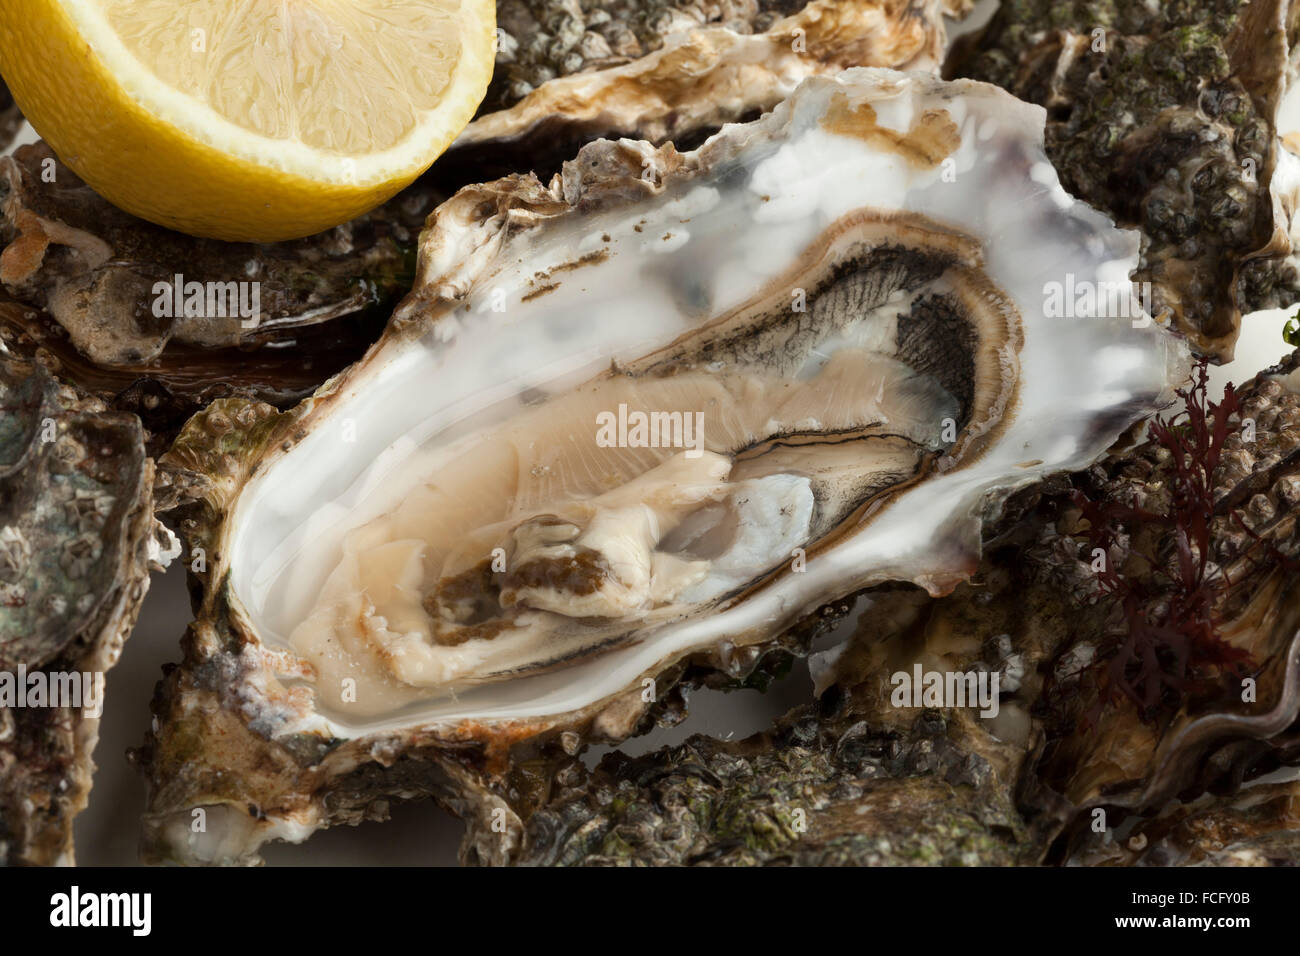 Close up of an open fresh raw pacific oyster ready to eat Stock Photo